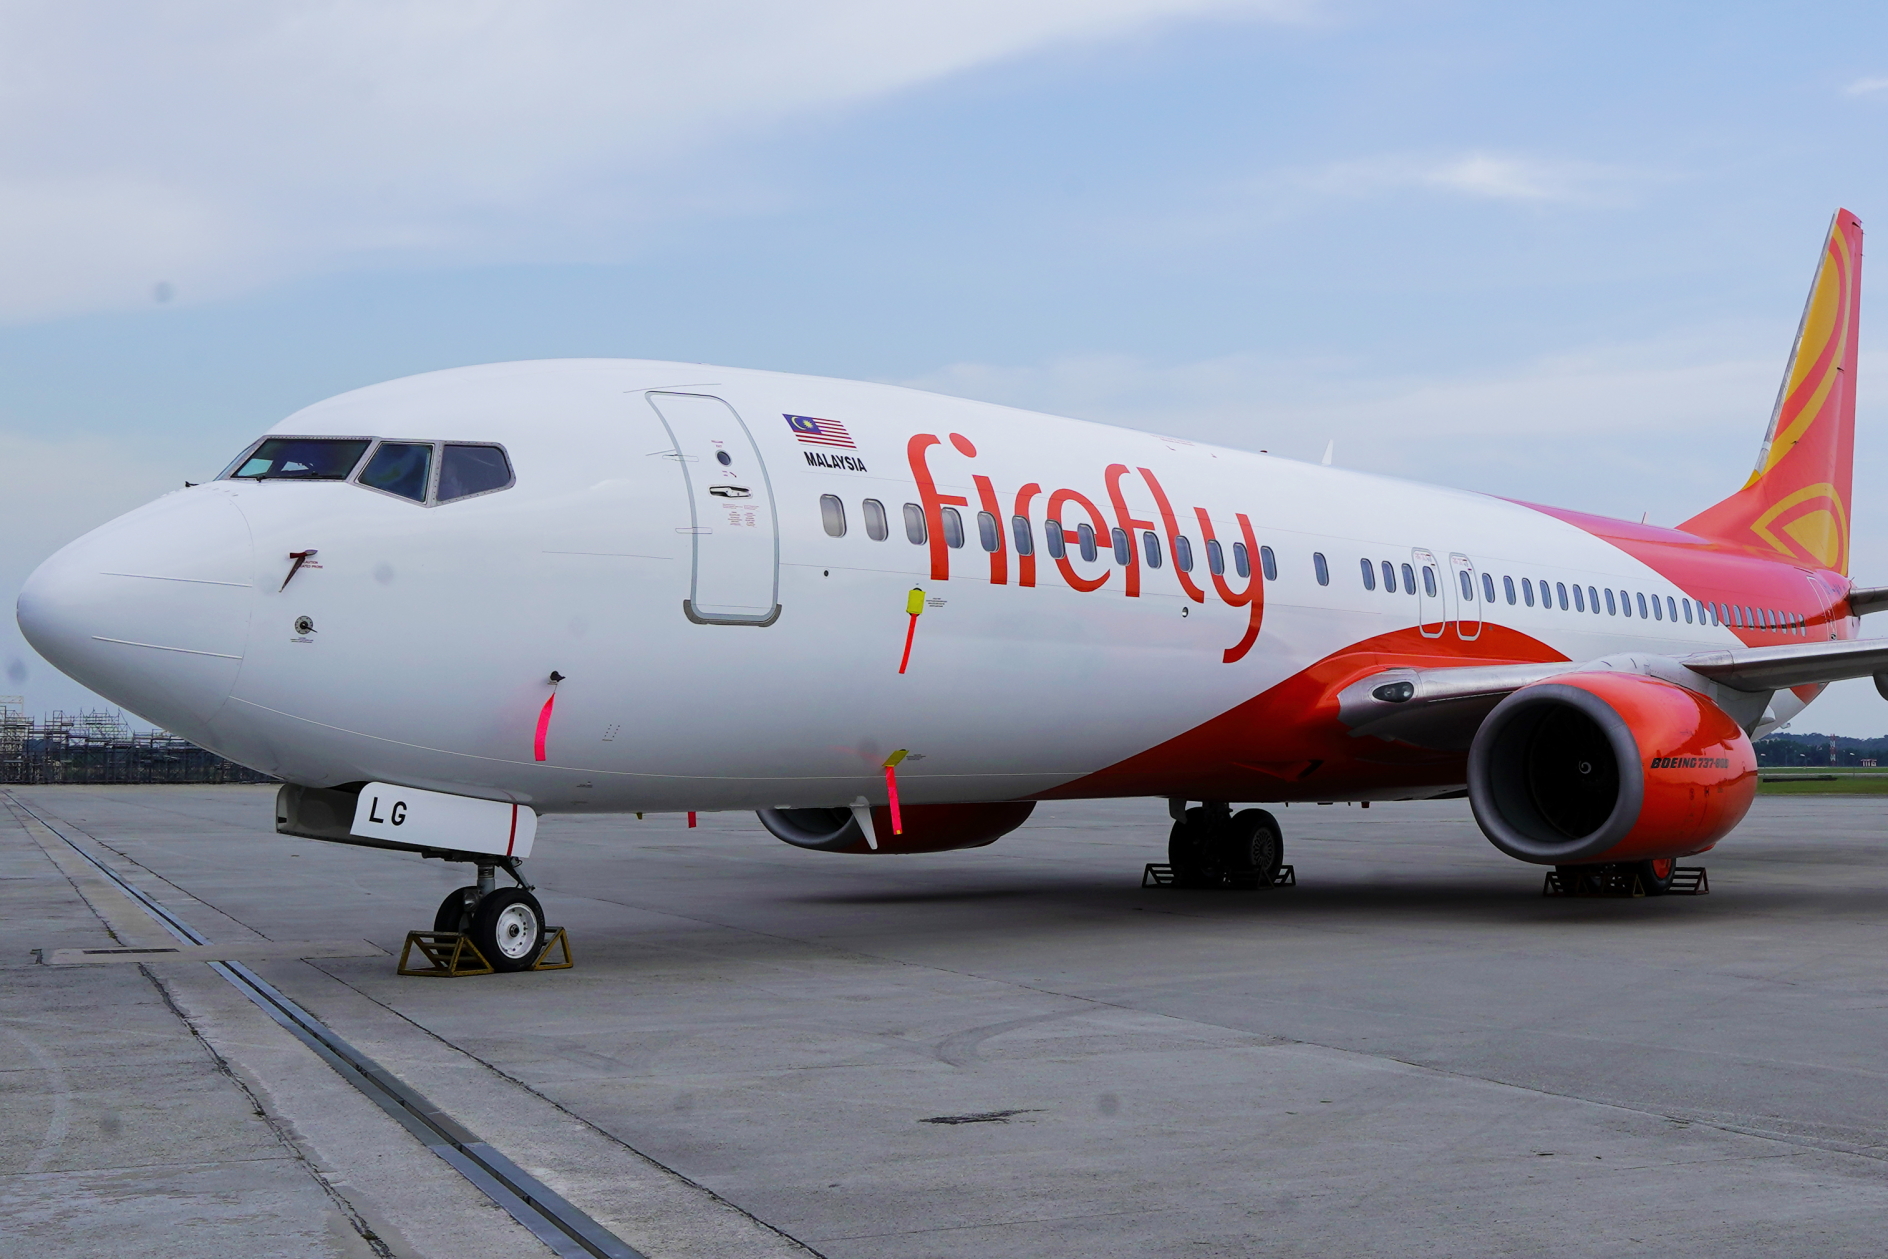 Firefly Boeing 737. Click to enlarge.